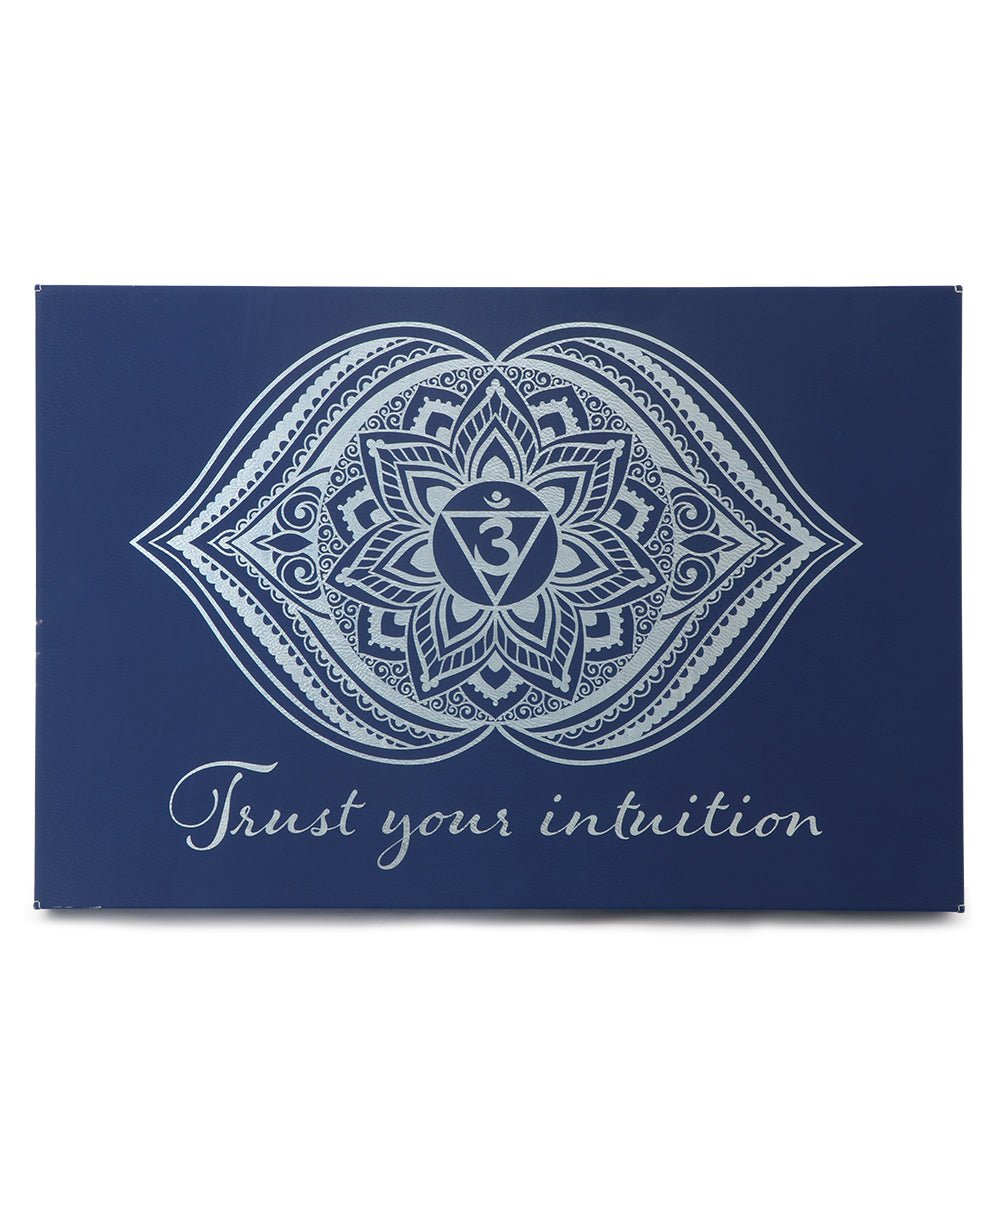 Trust Your Intuition Third Eye Chakra Wall Hanging - Posters, Prints, & Visual Artwork